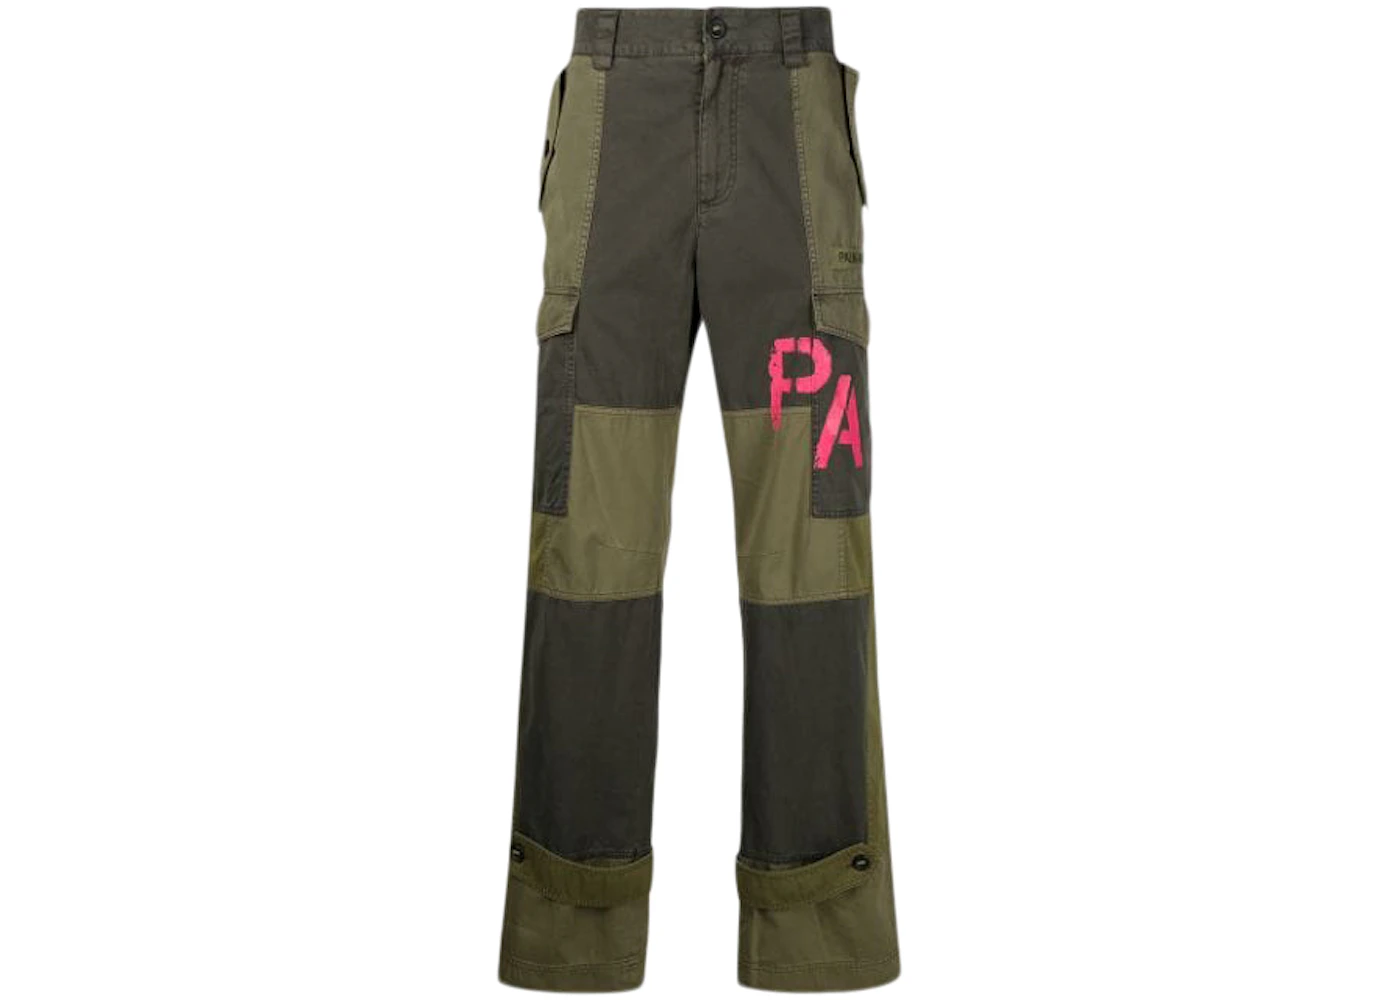 Army green cargo pants LV, Hand-stamped in Los